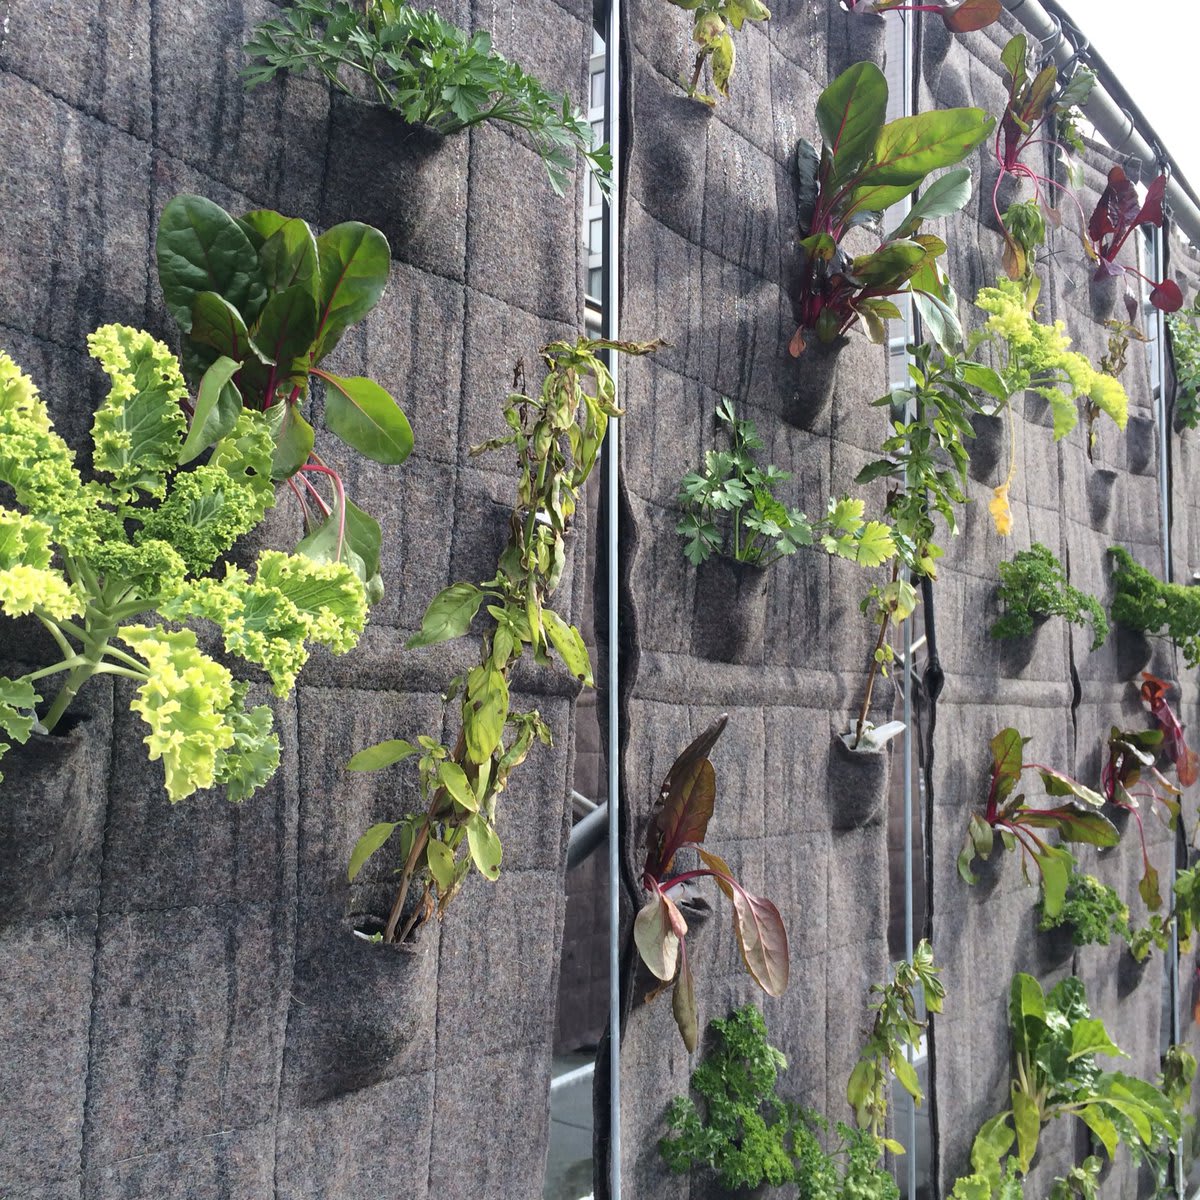 Thank you @agricultureMTL @howlaura @ligne_verte for showing us your rooftop garden today!